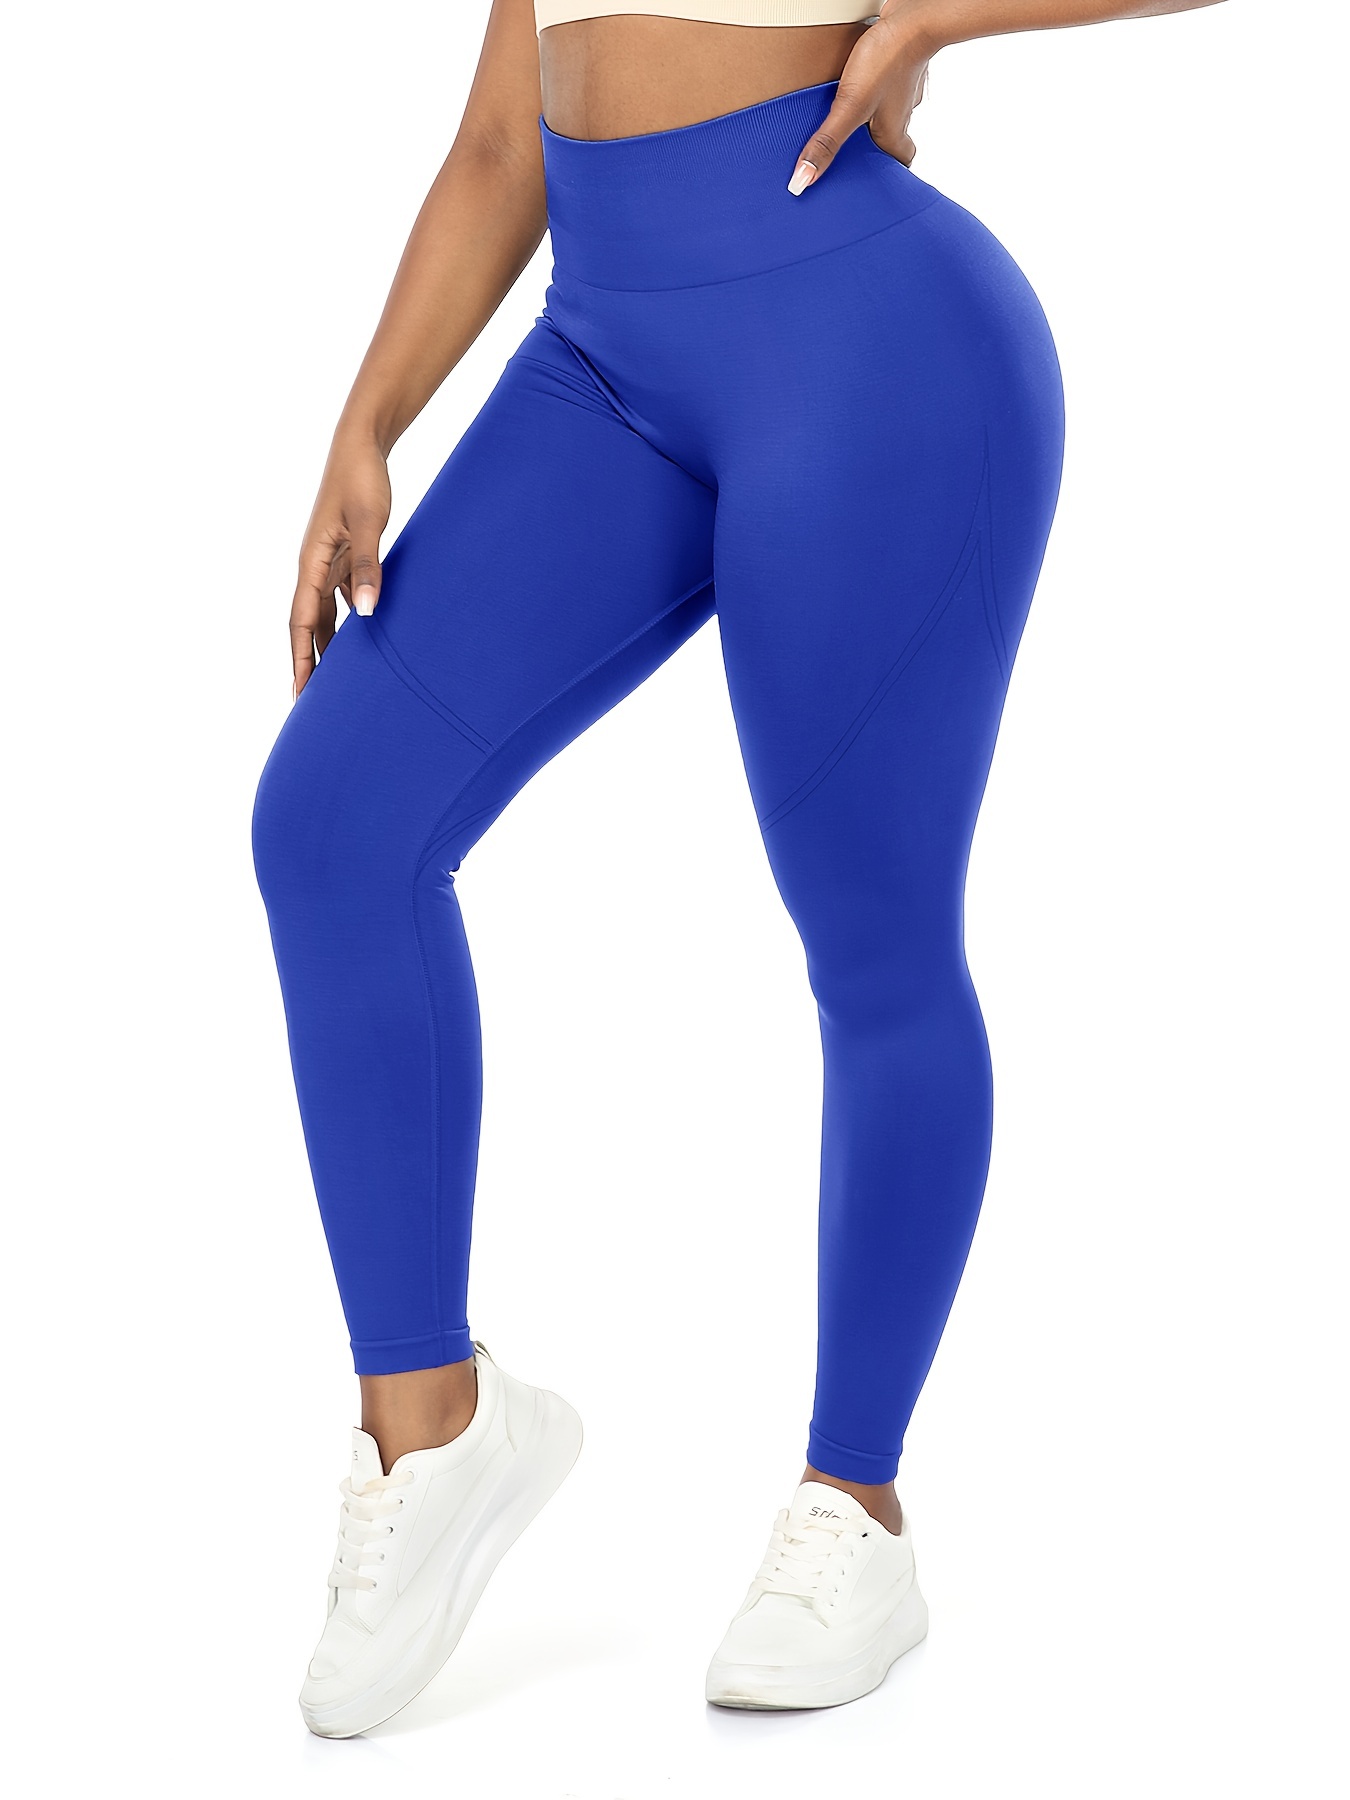 QOQ Seamless Workout Scrunch Leggings for Women Butt Lifting Contour  Leggings High Waisted Yoga Pants Slate Blue S at  Women's Clothing  store